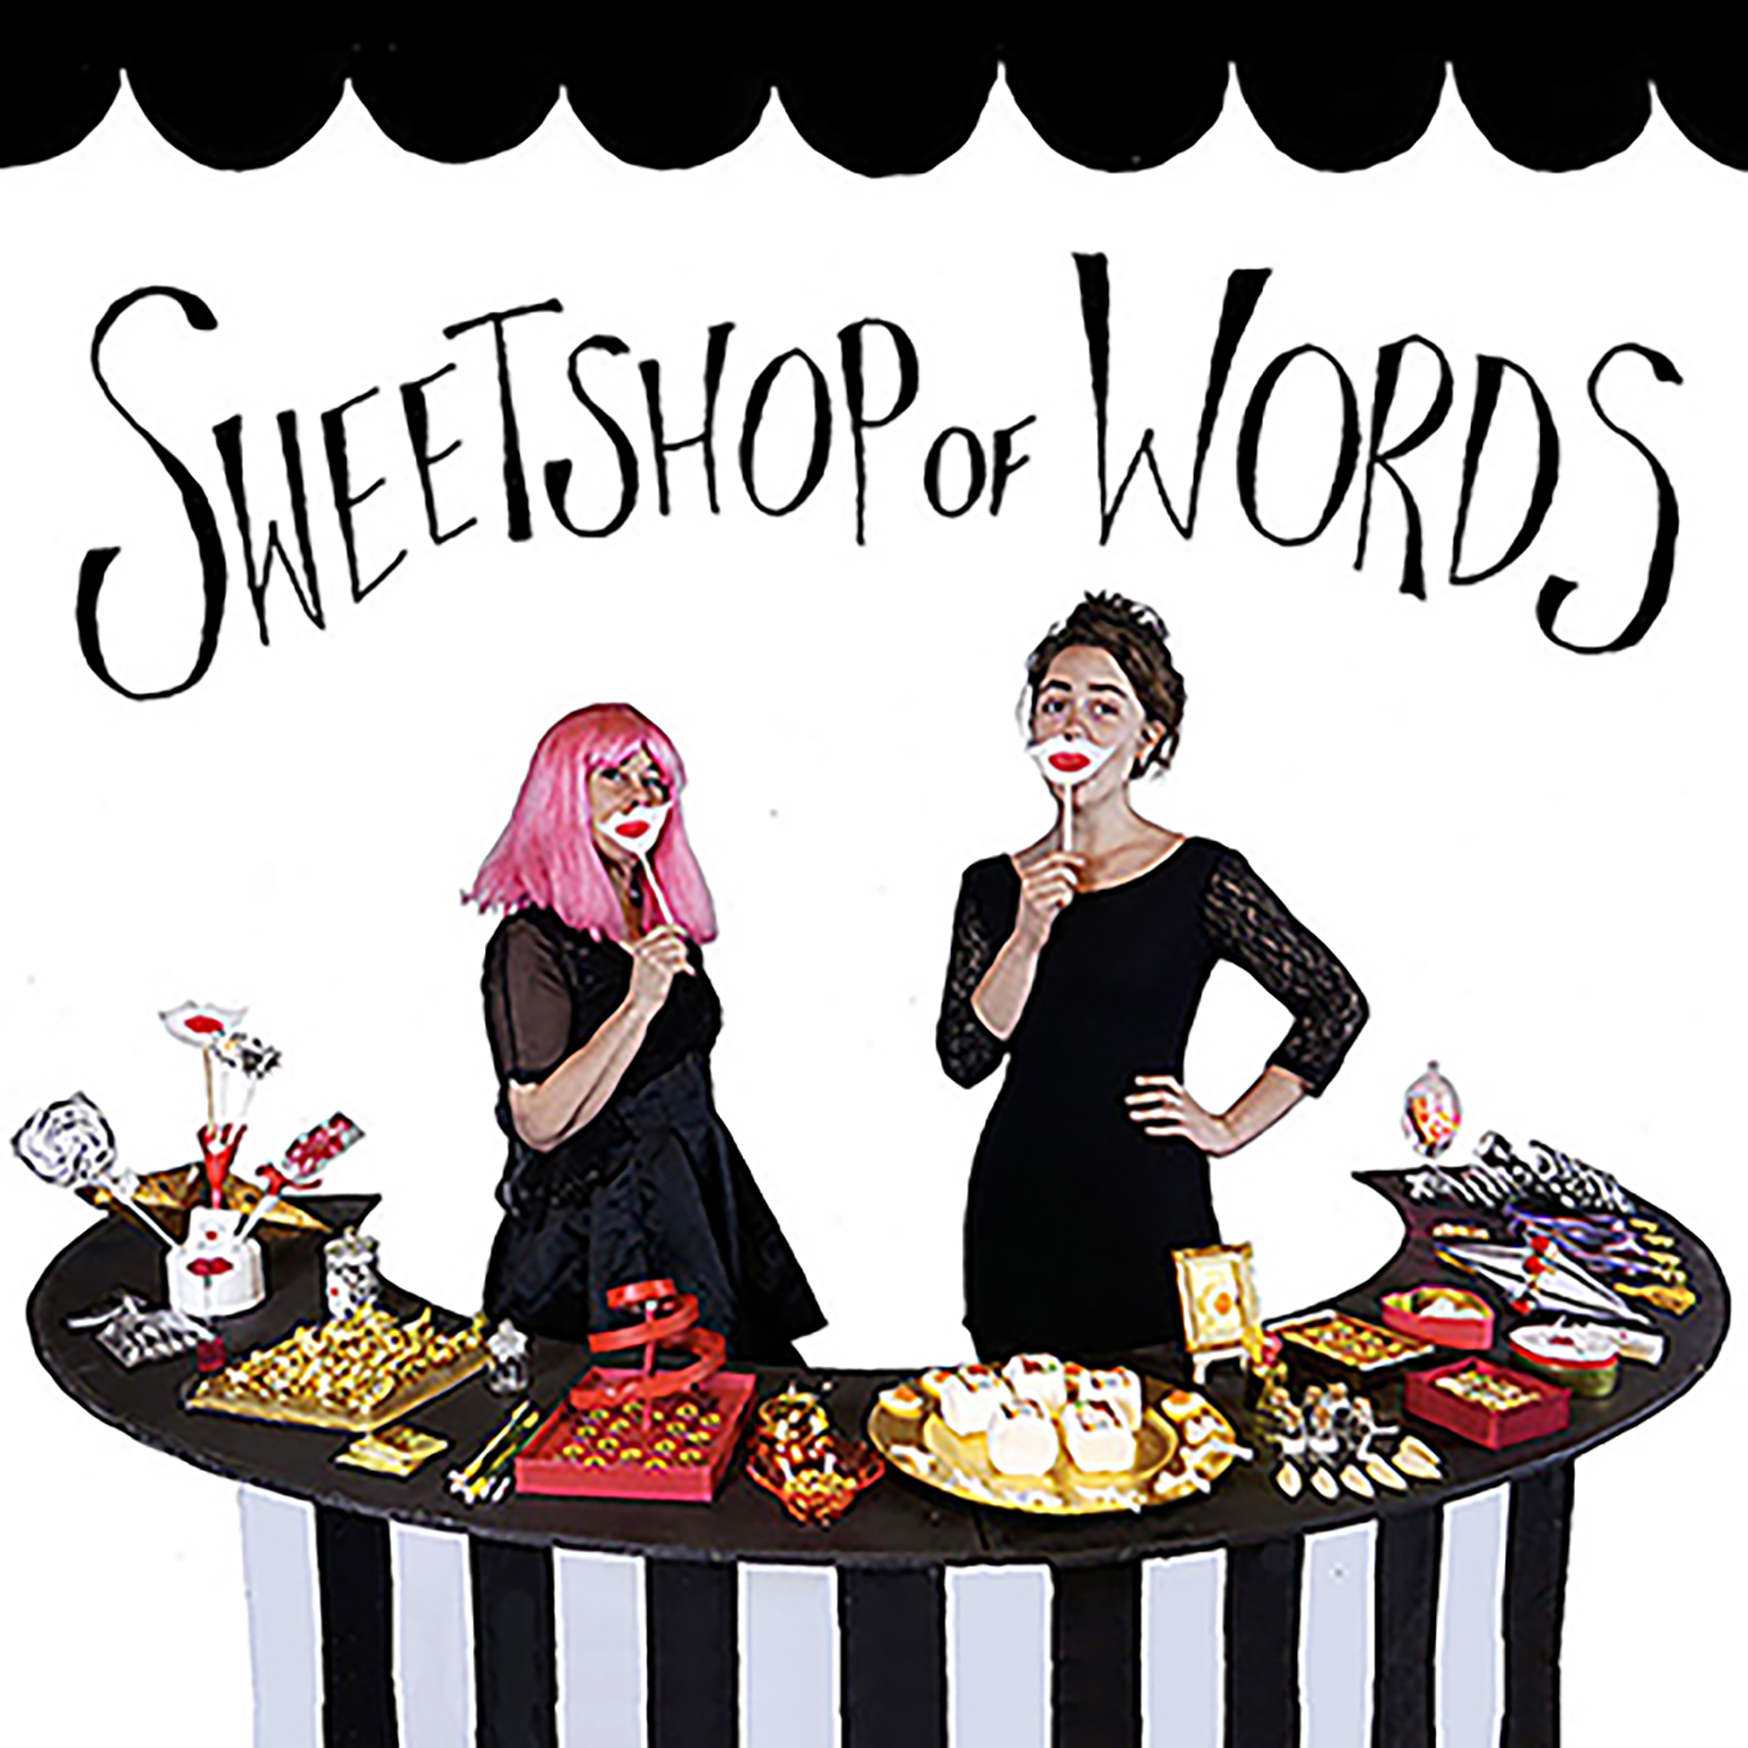 Quay Words presents The Sweetshop of Words